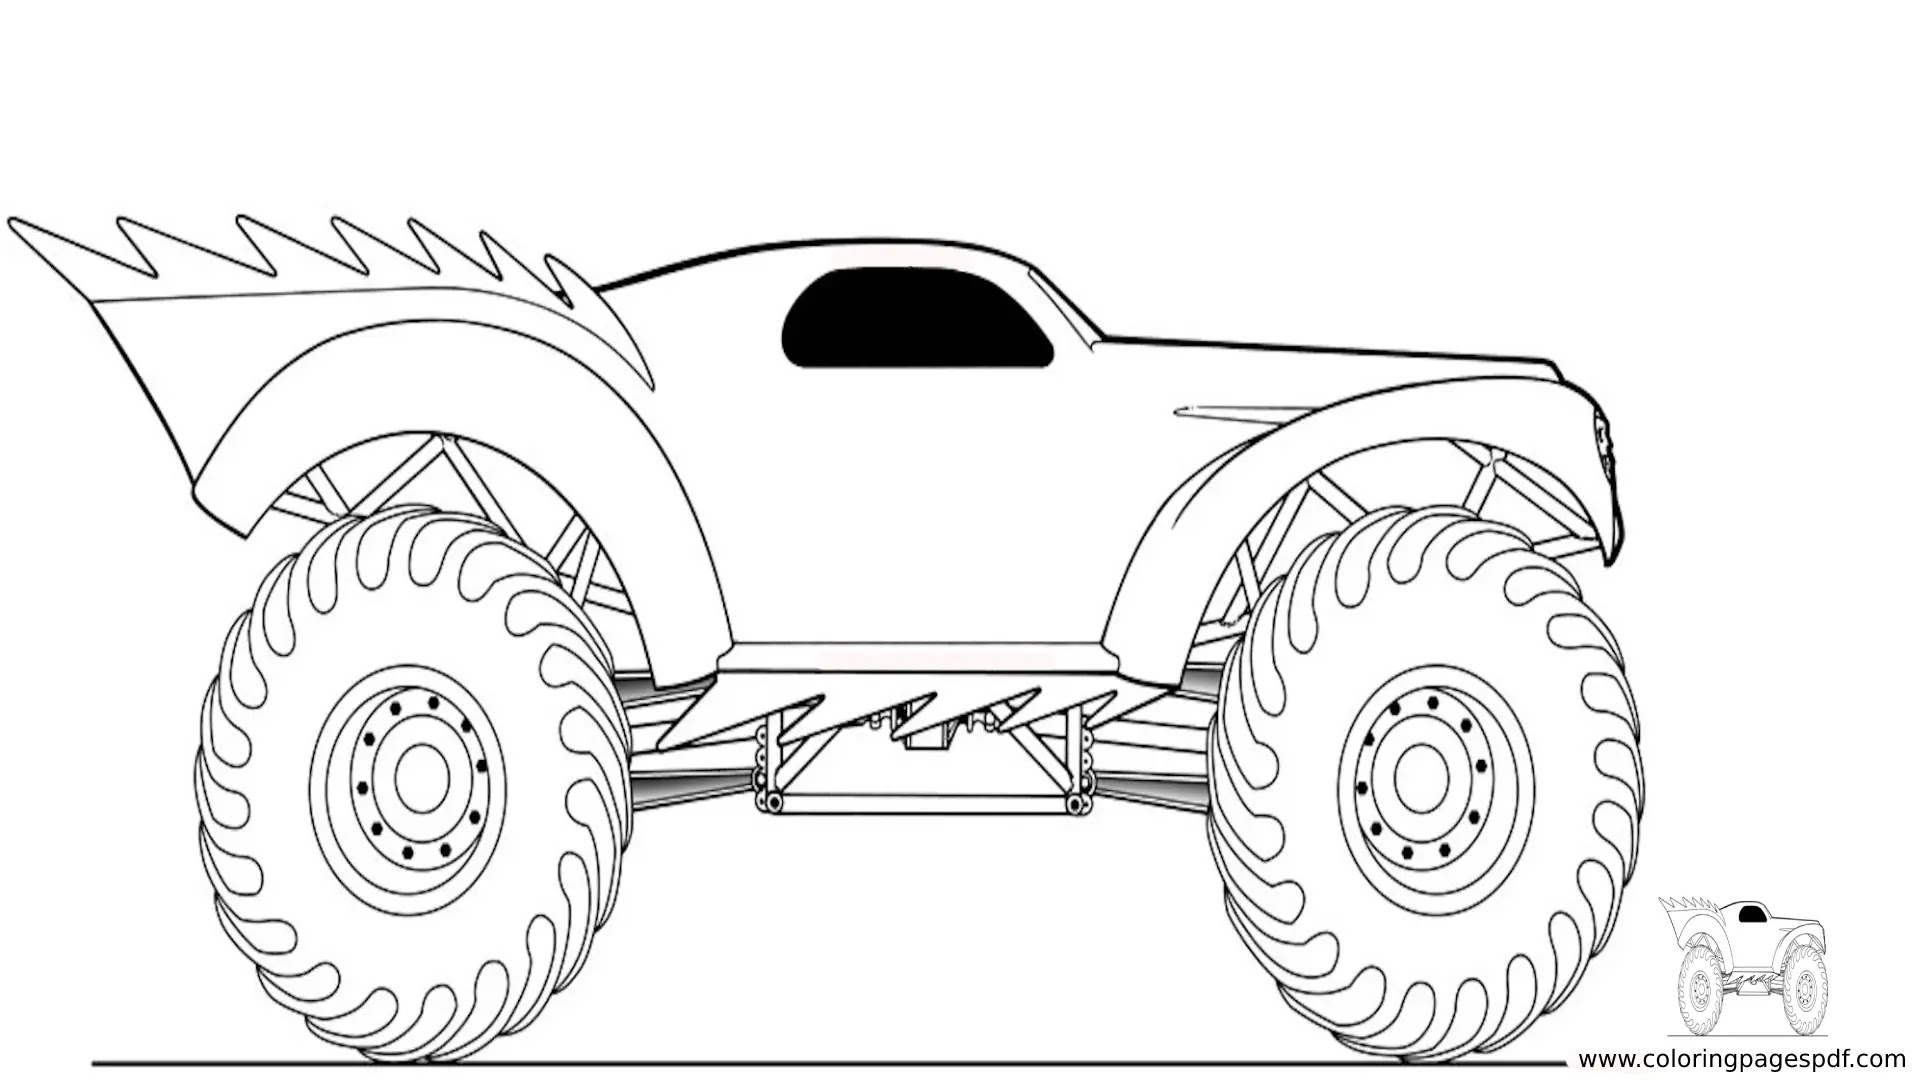 Coloring Pages Of A Monster Truck With Spikes